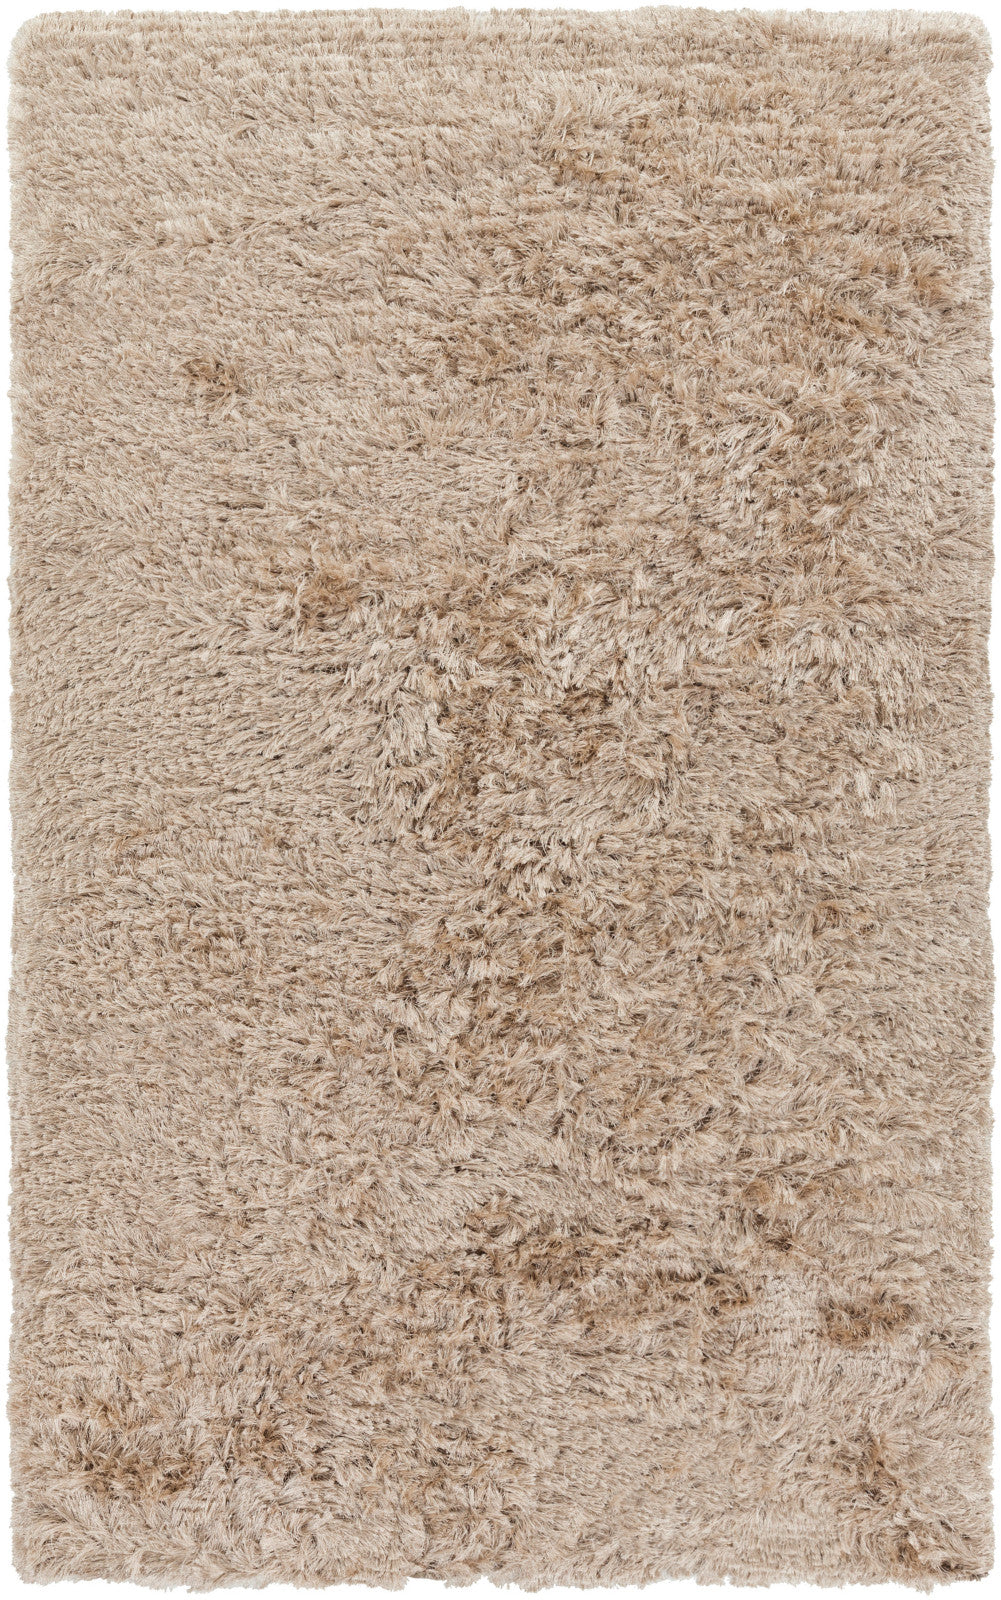 Surya Whisper WHI-1004 Area Rug by Candice Olson